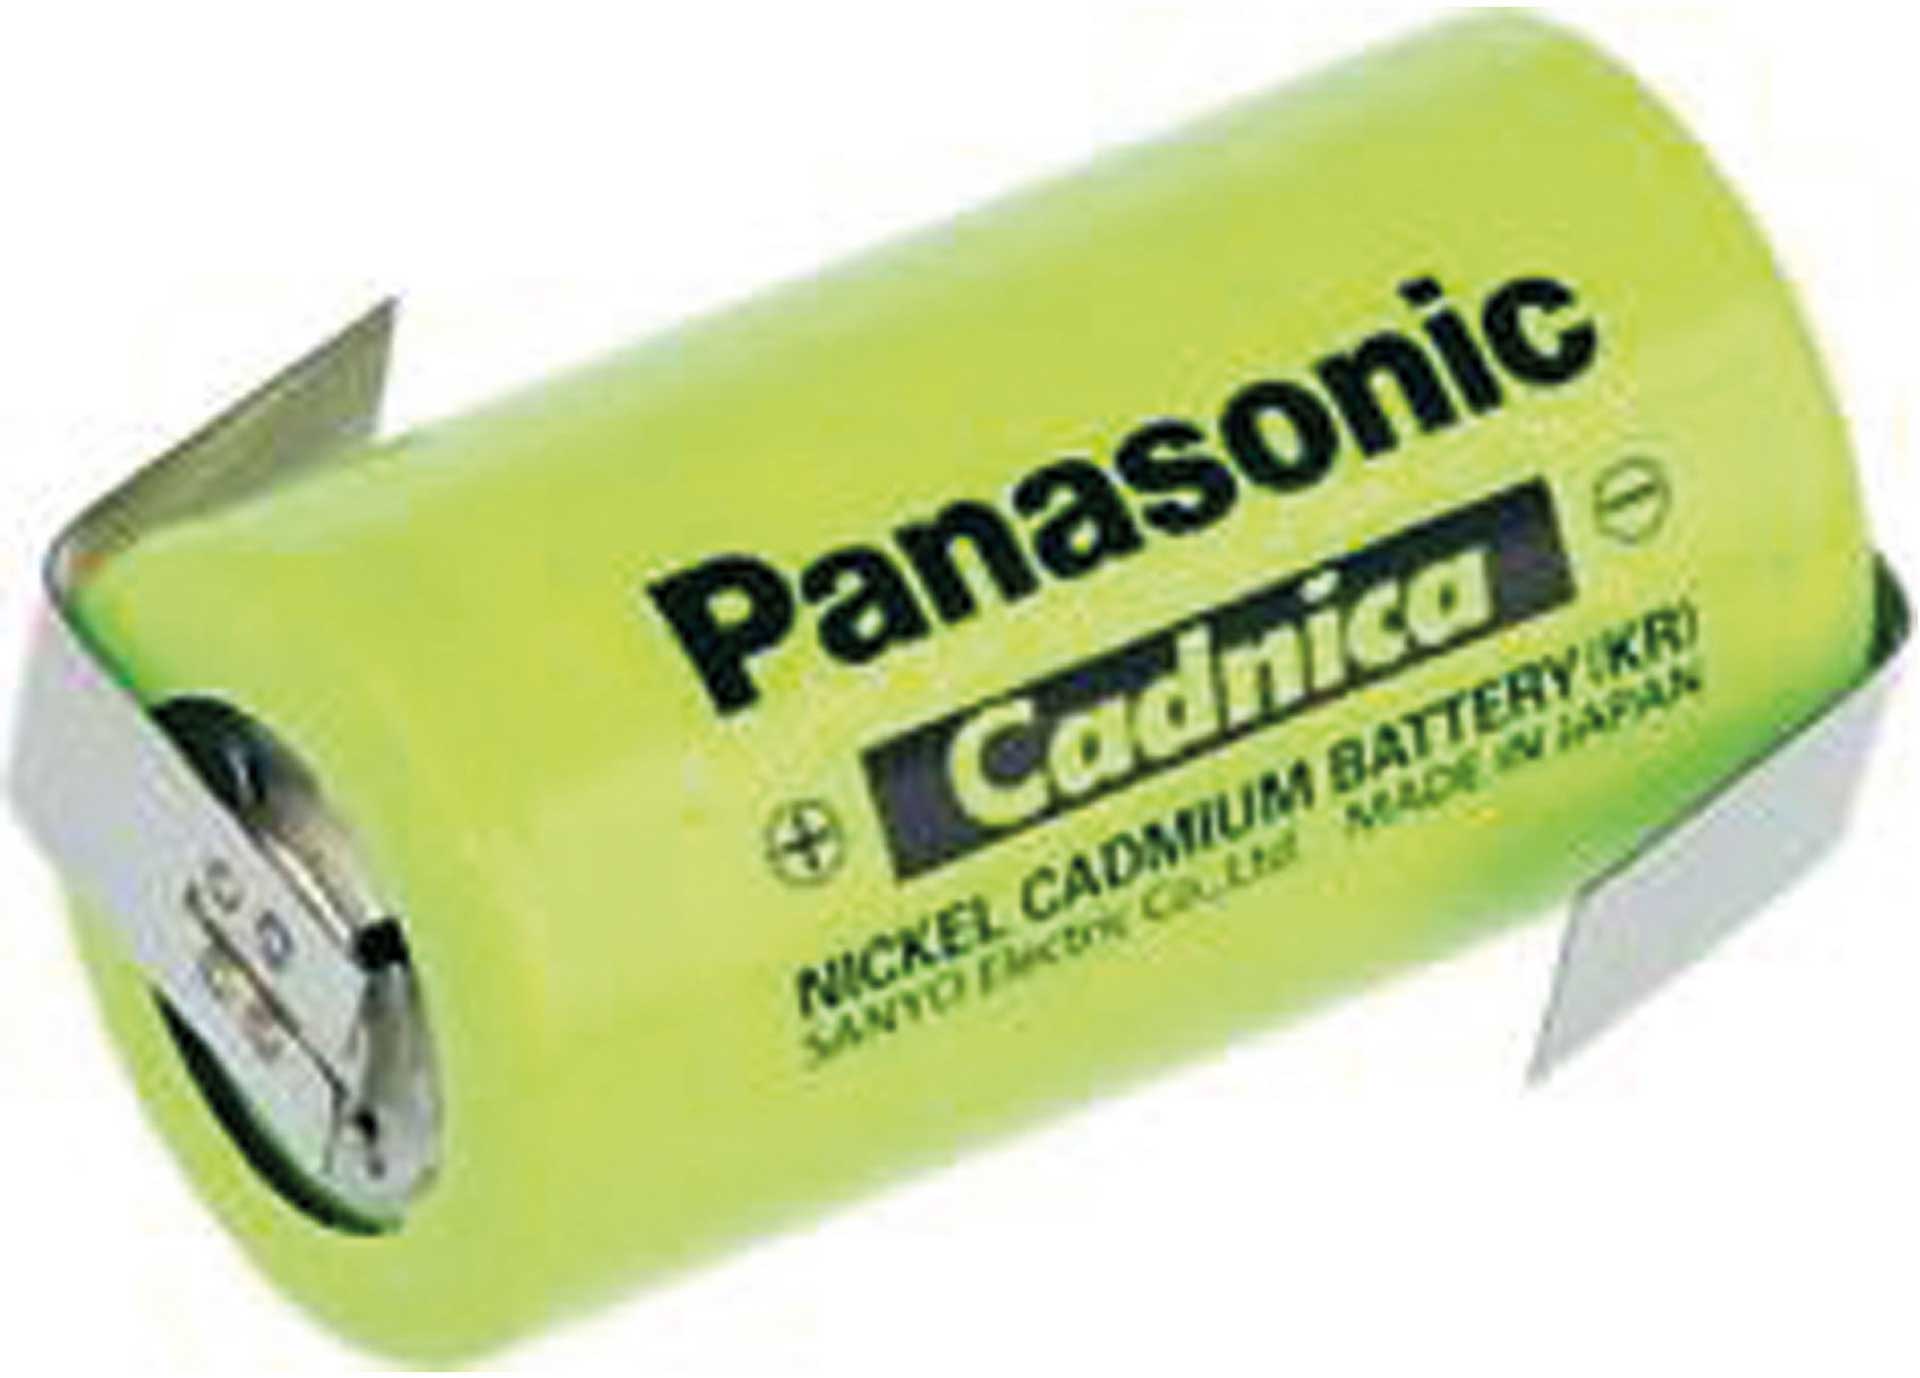 SANYO NICD SINGLE CELL BATTERY 1.2 VOLT 3000 MAH WITH SOLDERING TAG N-3000CR